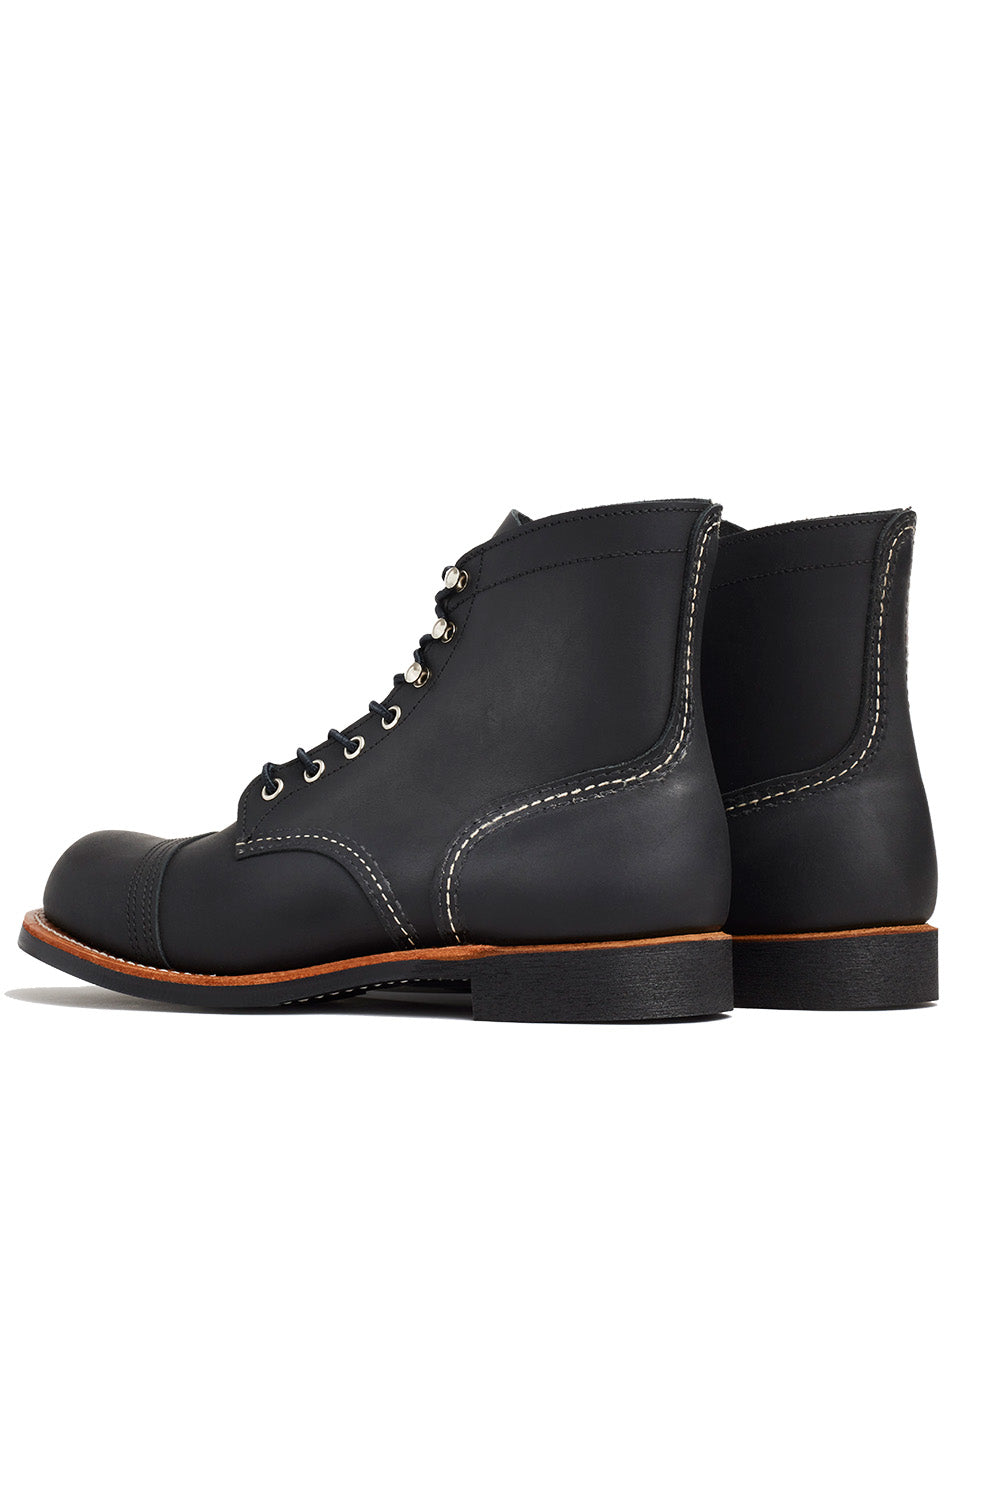 Red Wing - Iron Ranger - Black Harness - Back